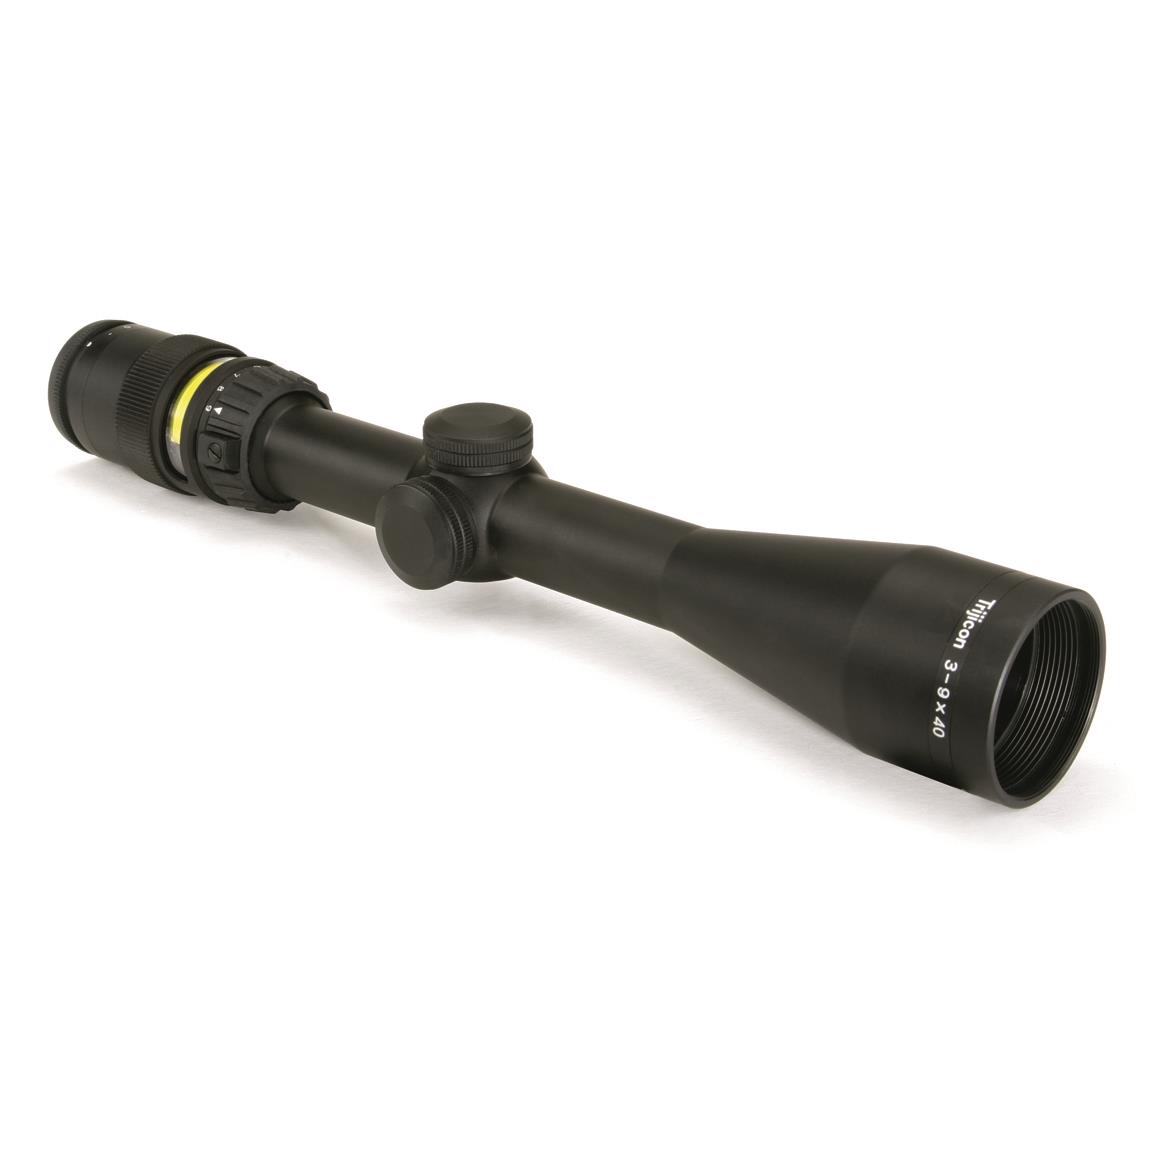 Trijicon AccuPoint 3-9x40mm Rifle Scope, 1" Tube, Mil-Dot Crosshair with Illuminated Amber Dot